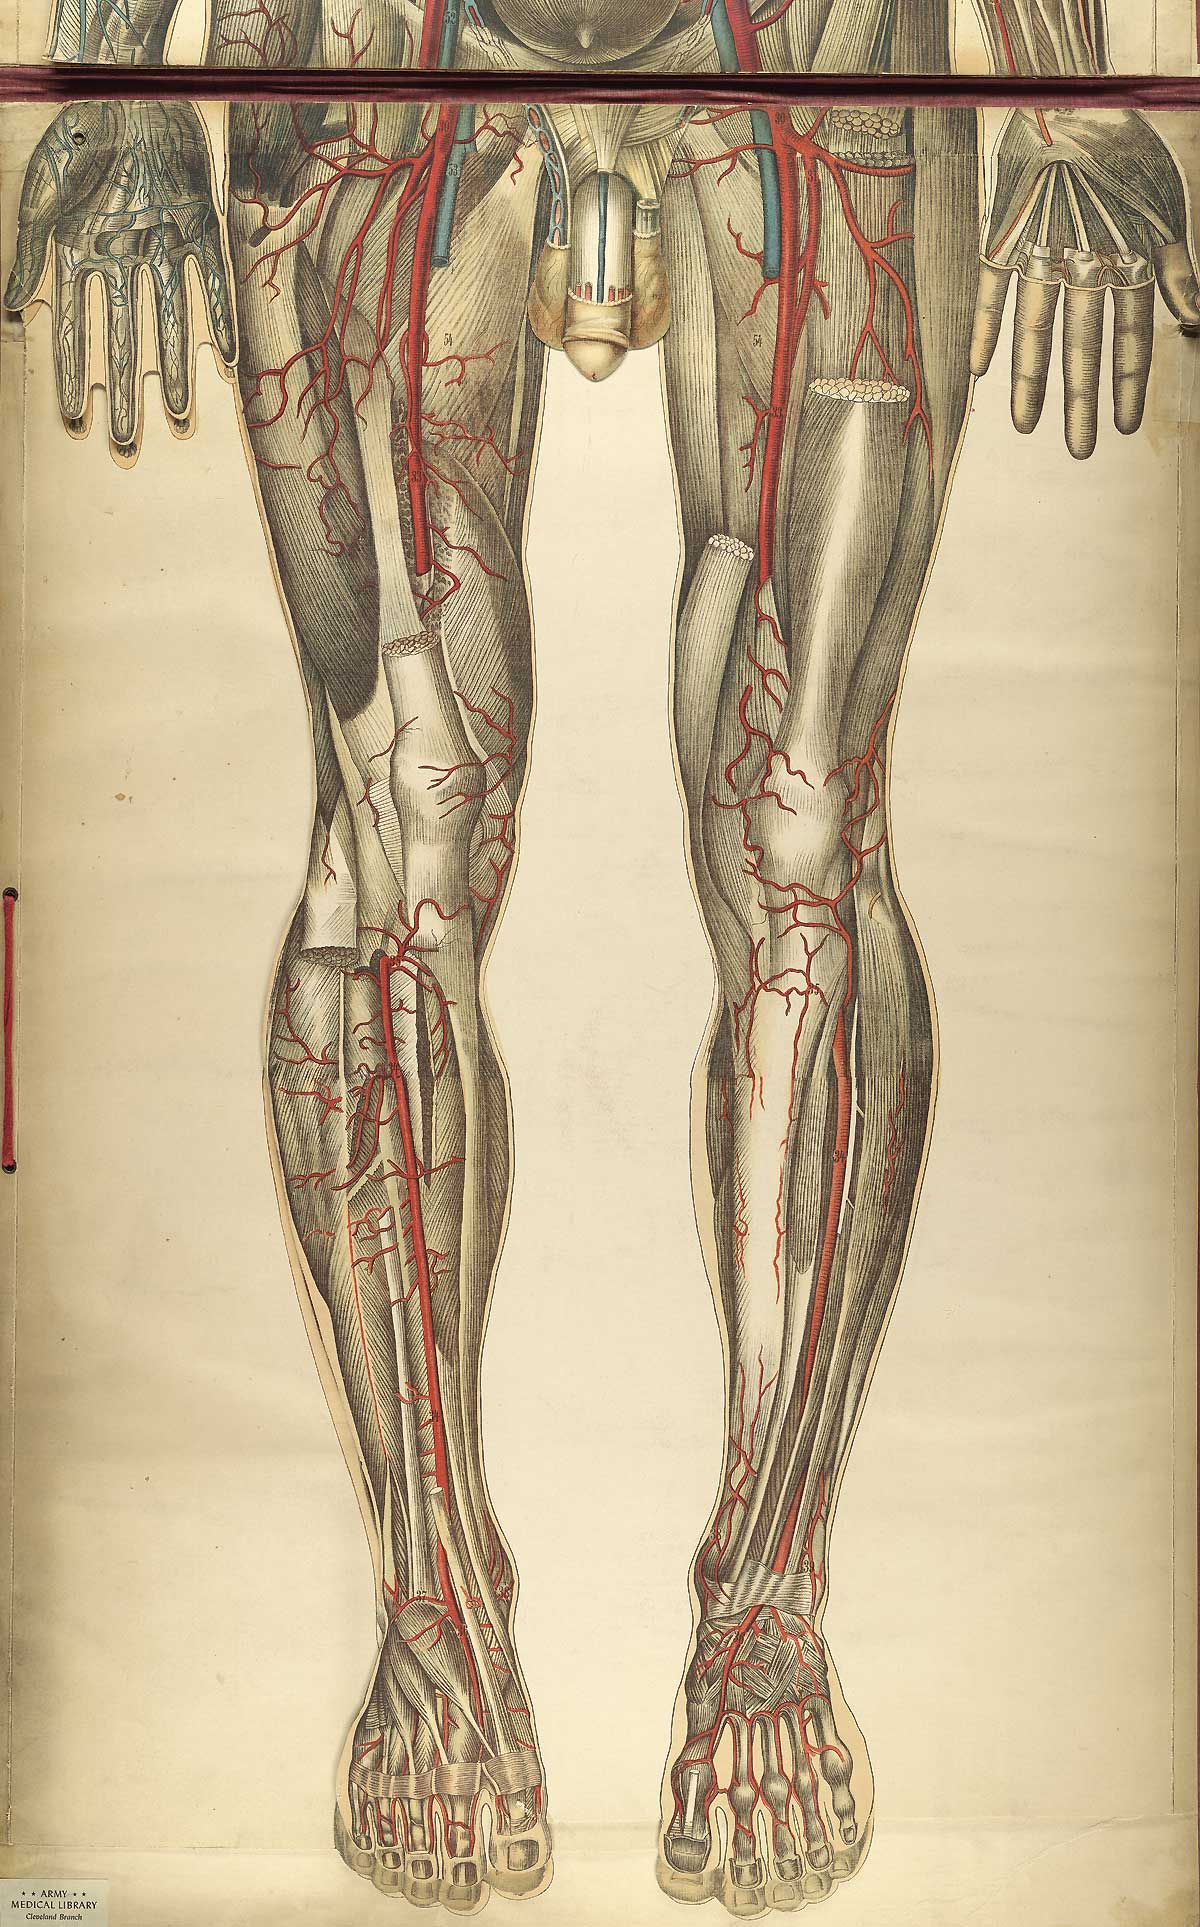 Chromolithograph showing the arterial and venous of the lower half of the front of the human body, from Julien Bouglé’s Le corps humain en grandeur naturelle, NLM Call no. WE B758c 1899.